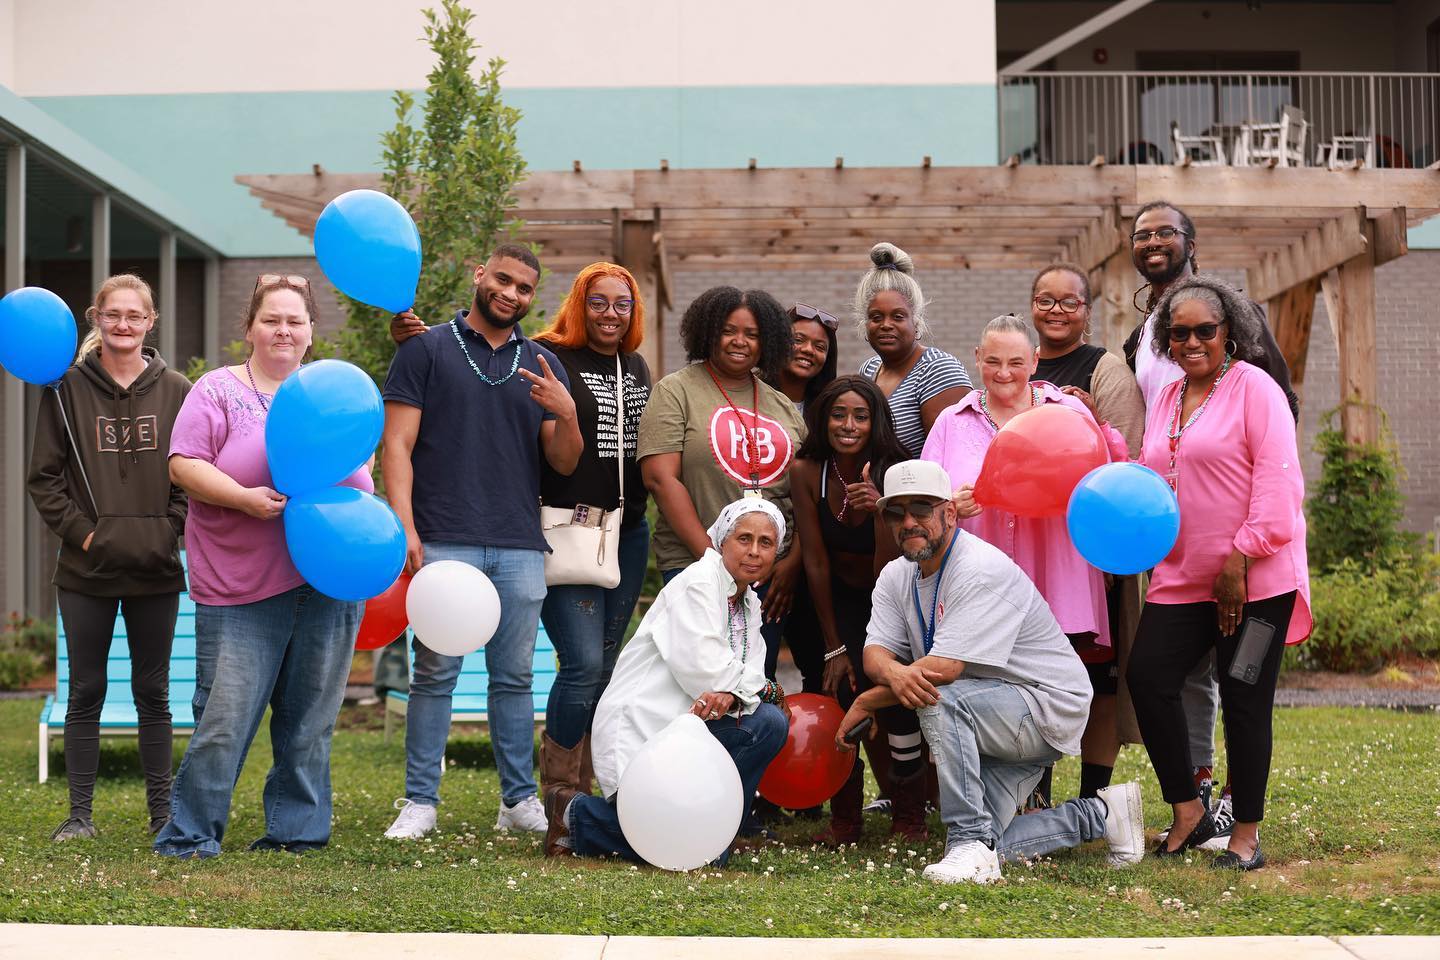 A diverse group of people from Memphis nonprofits posing with red, white, and blue balloons outside a building.